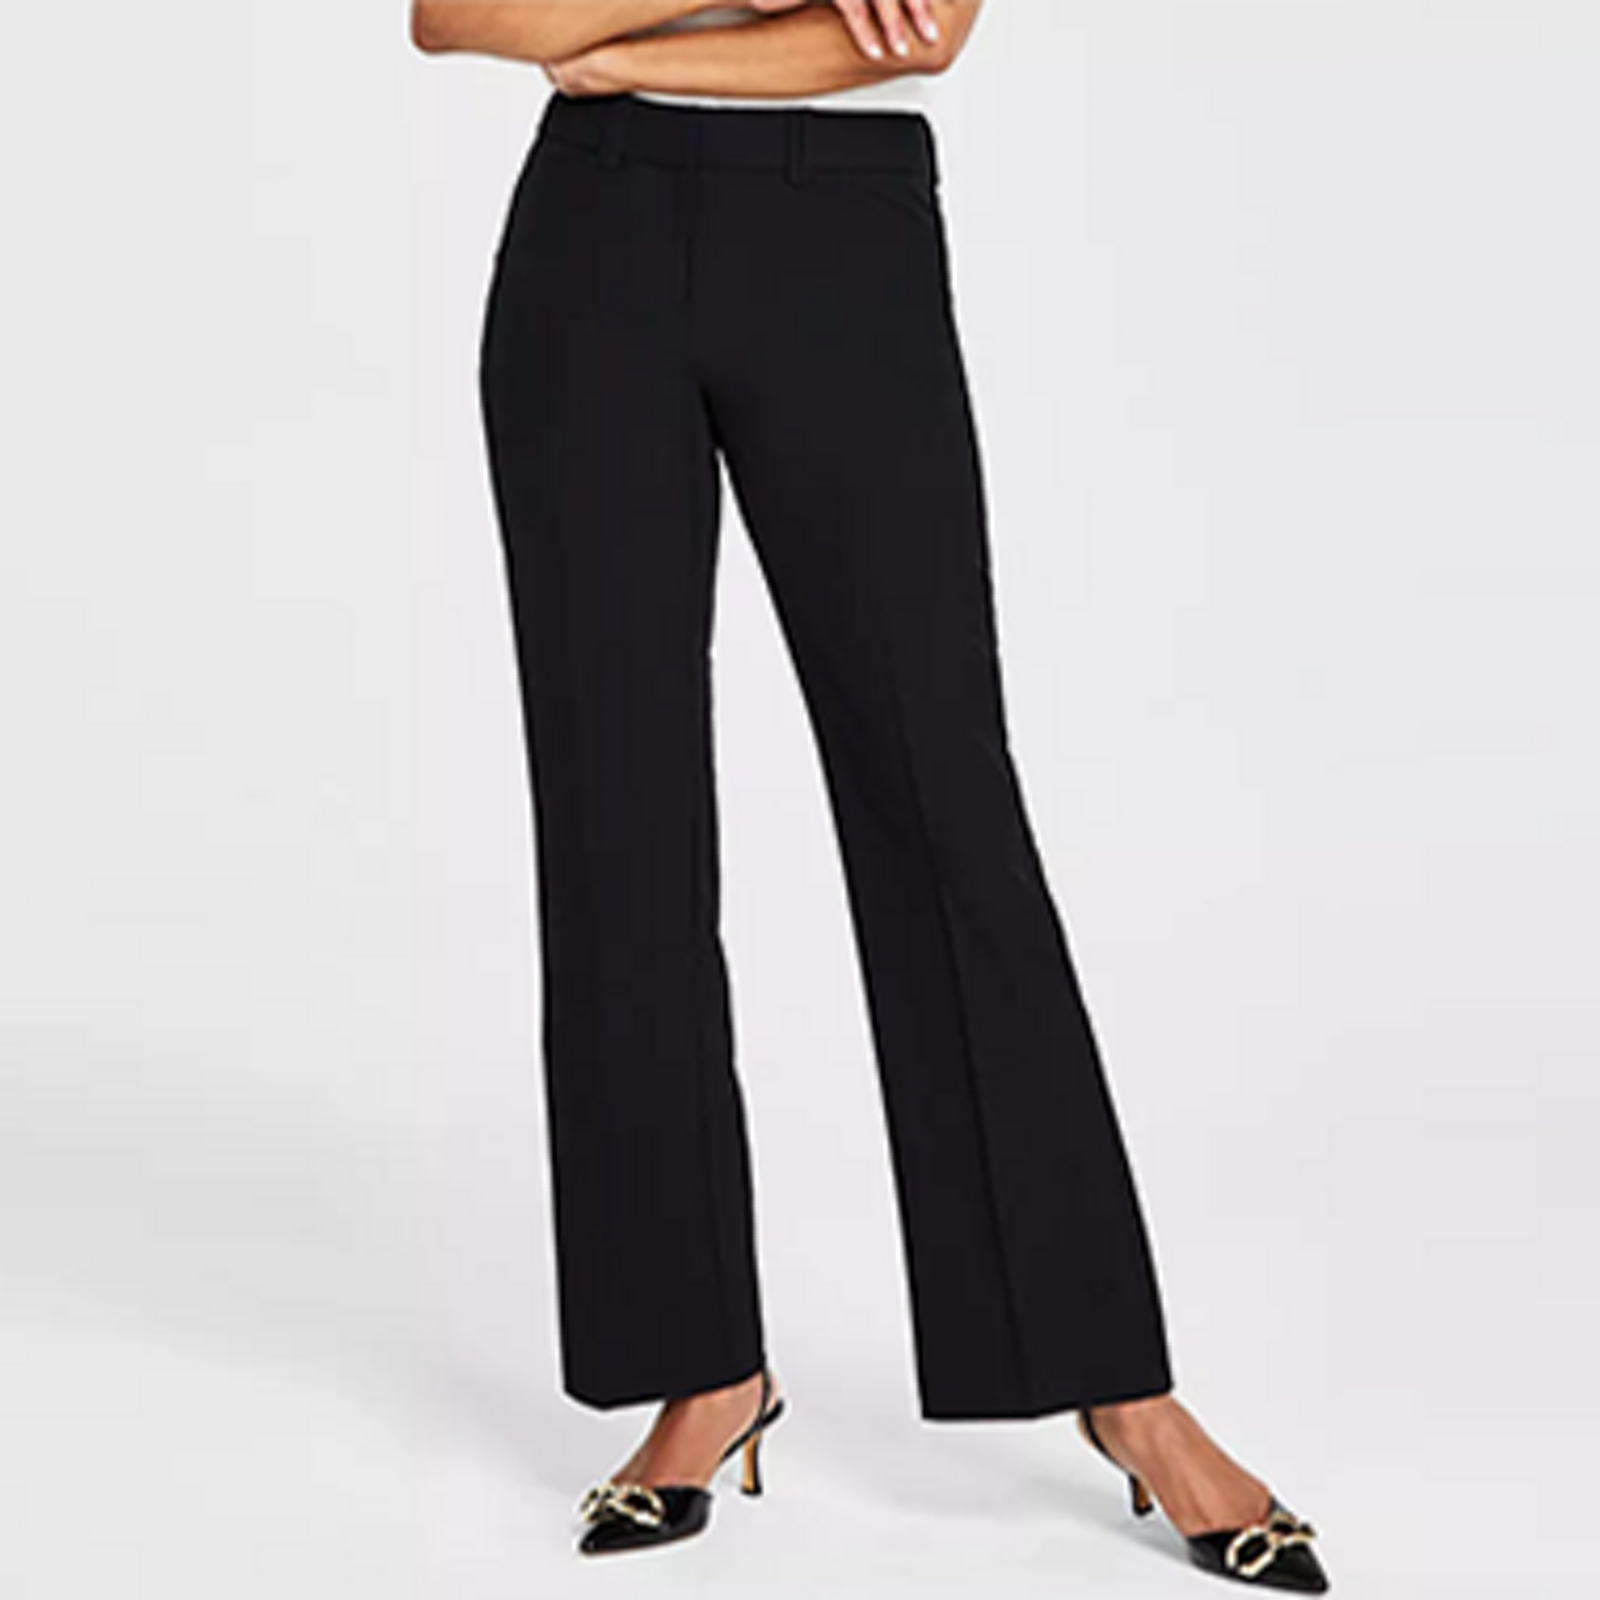 Polyester Women's Clothing - Macy's